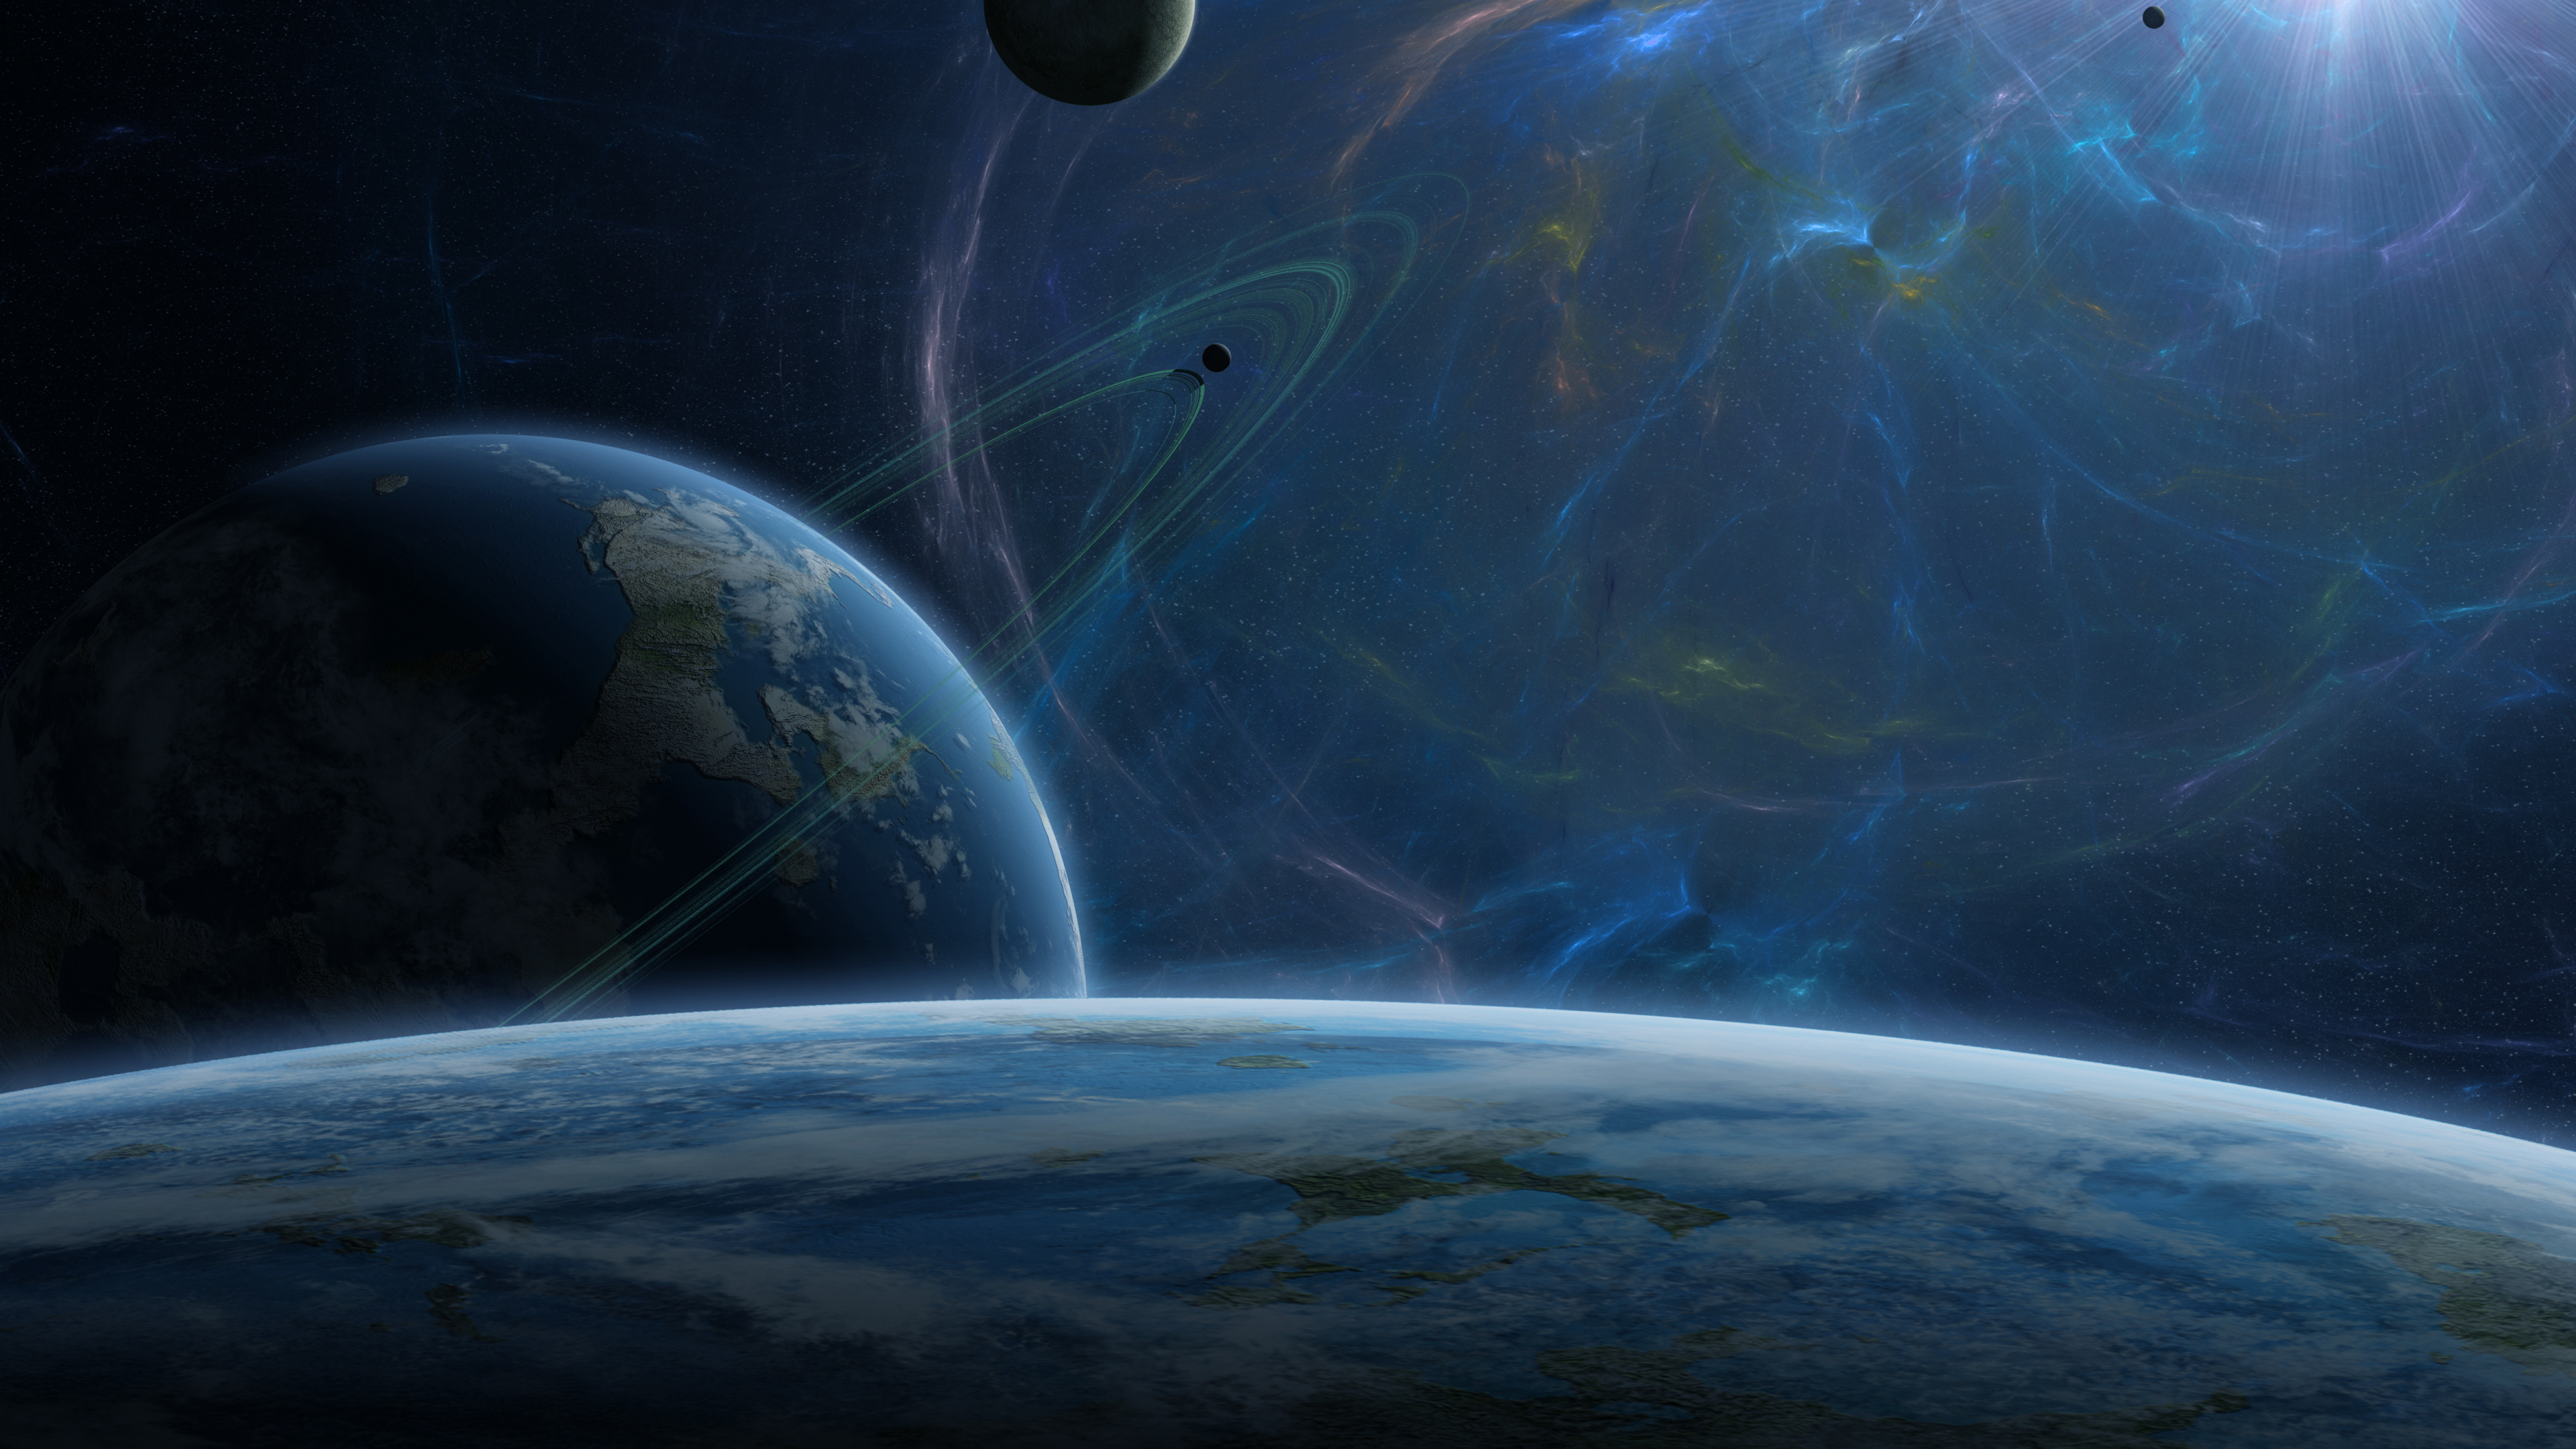 Blue and White Planet Illustration. Wallpaper in 3840x2160 Resolution